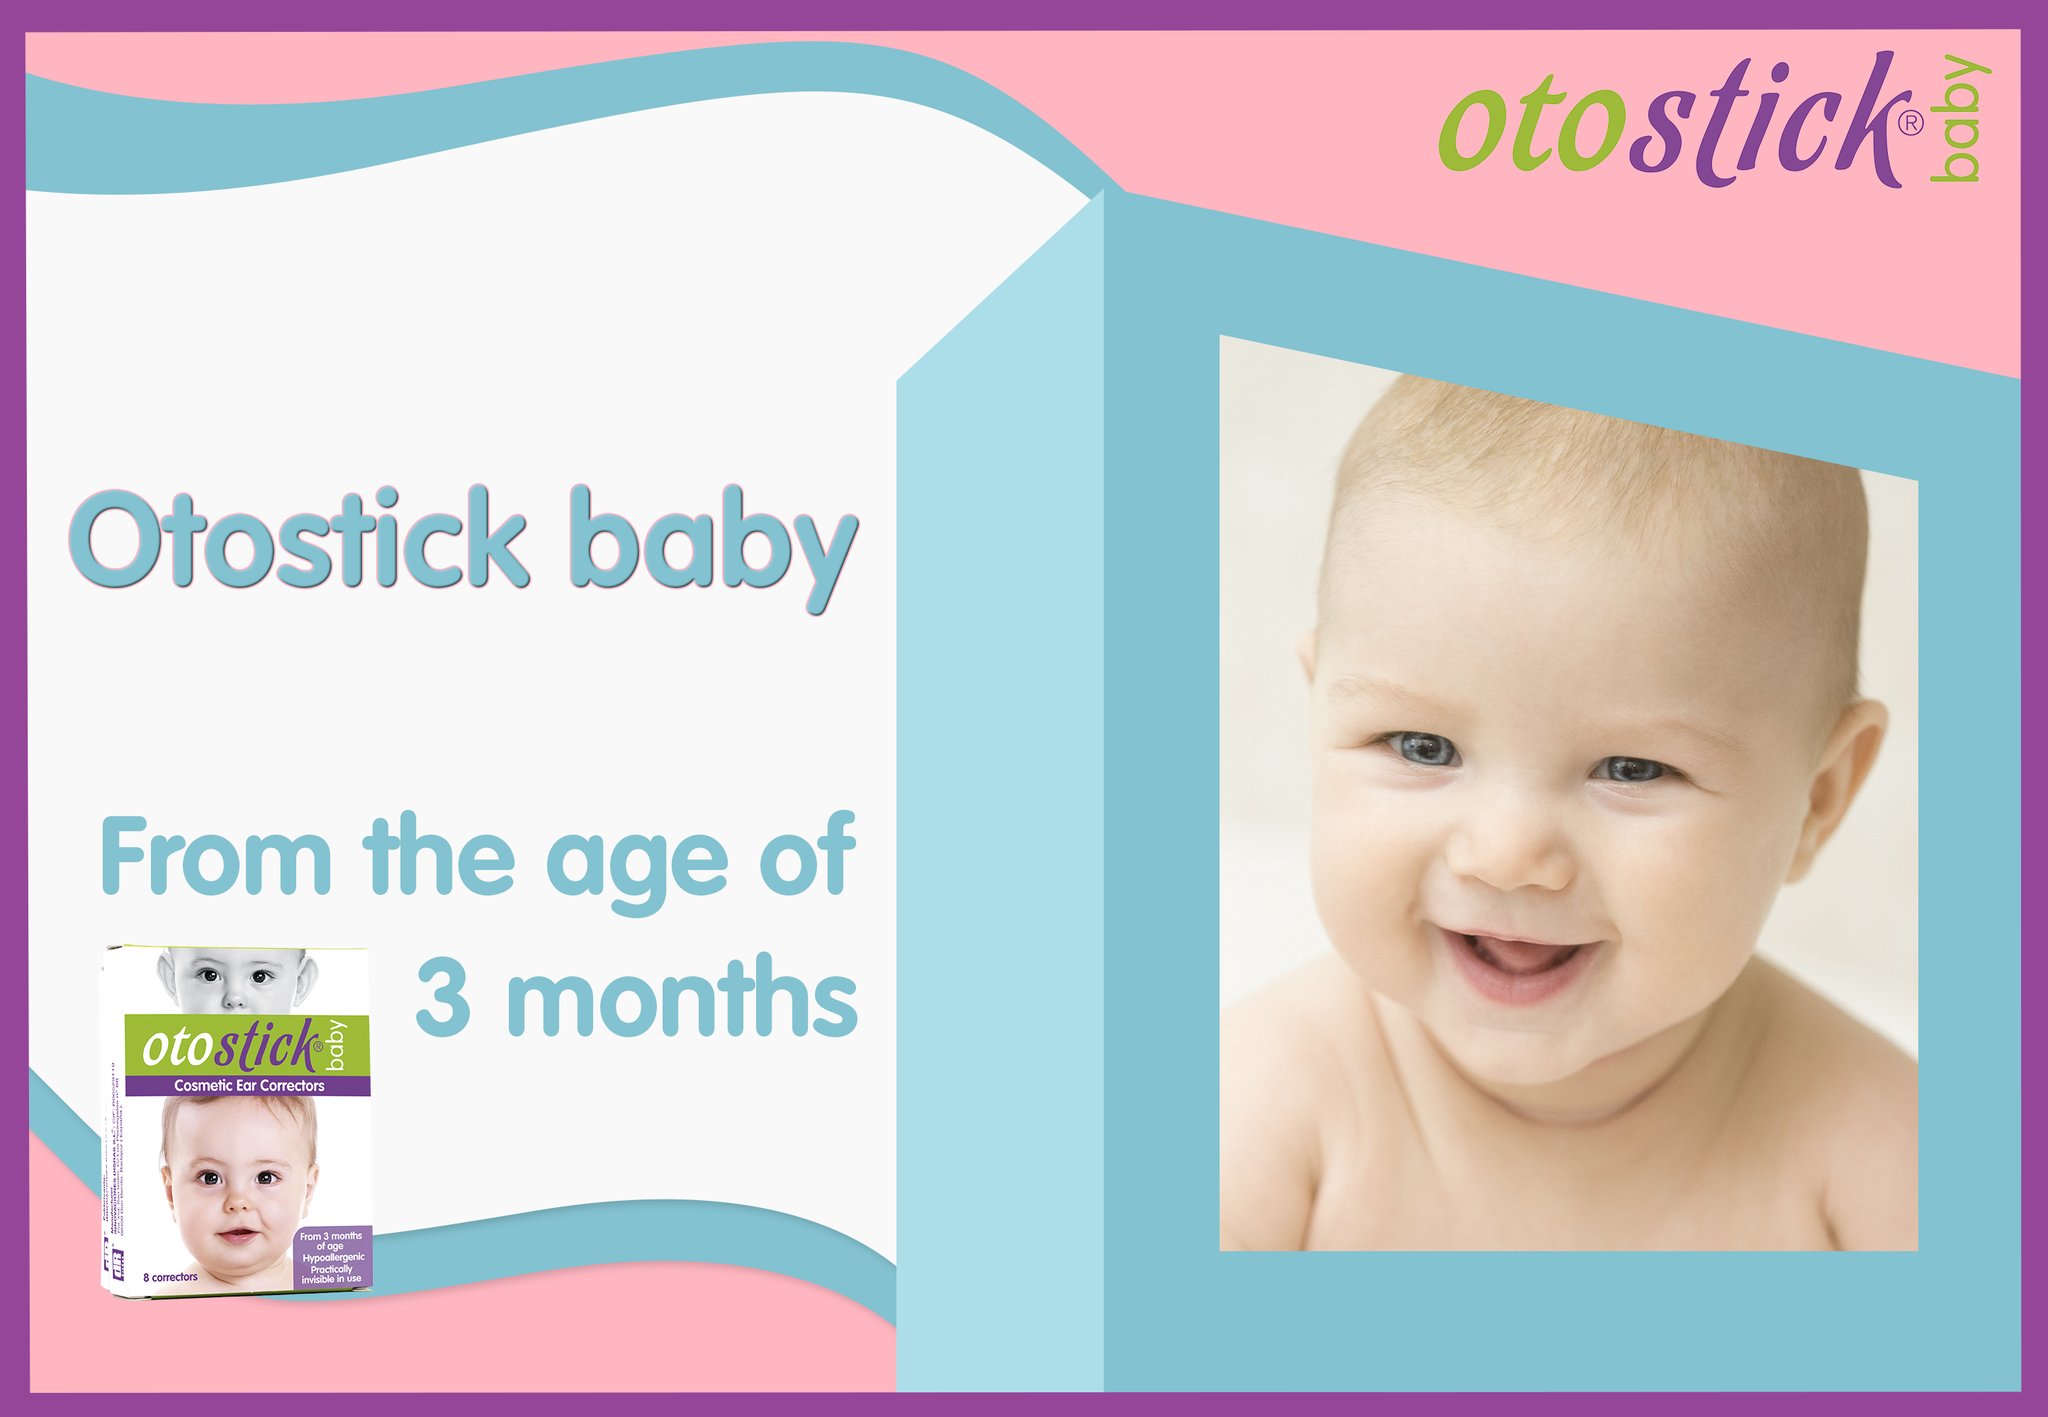 OtostickUSA on X: Otostick is suitable for children over 3 years